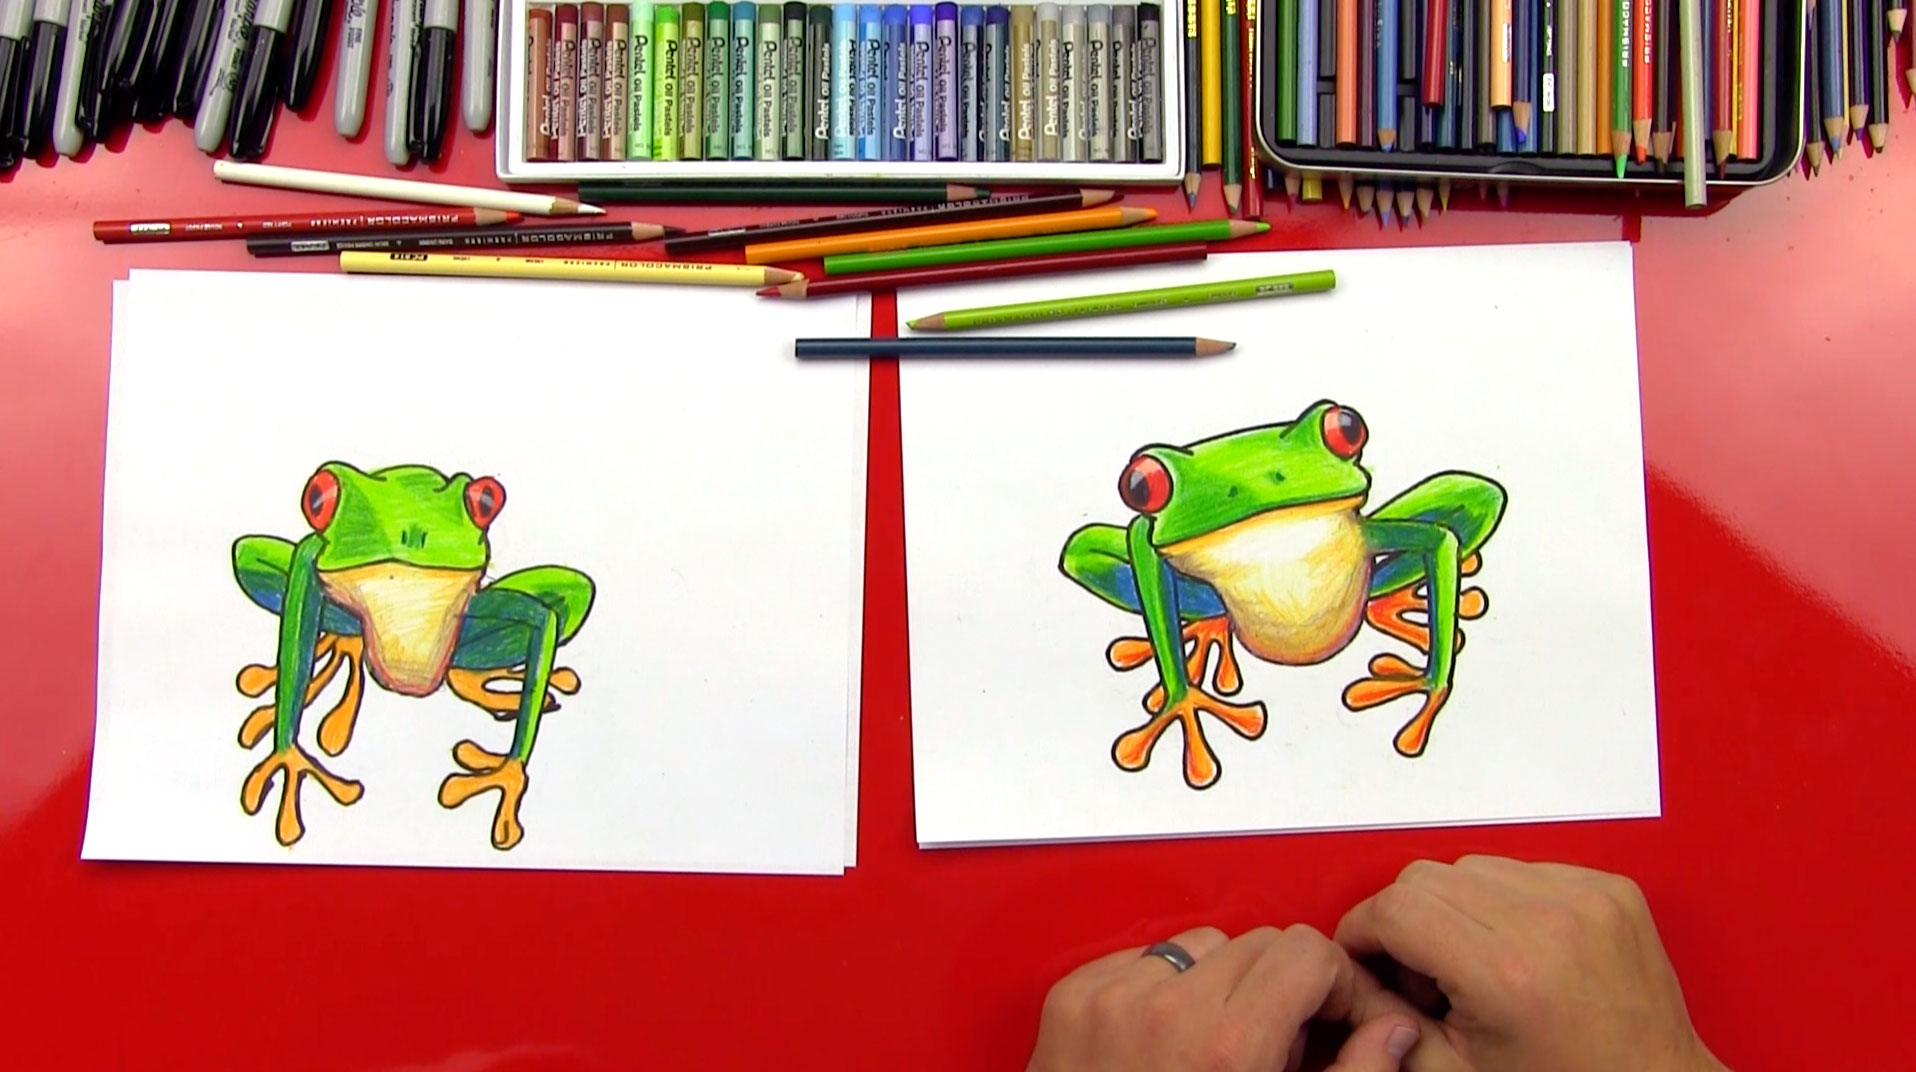 100+] Frog Drawing Pictures | Wallpapers.com